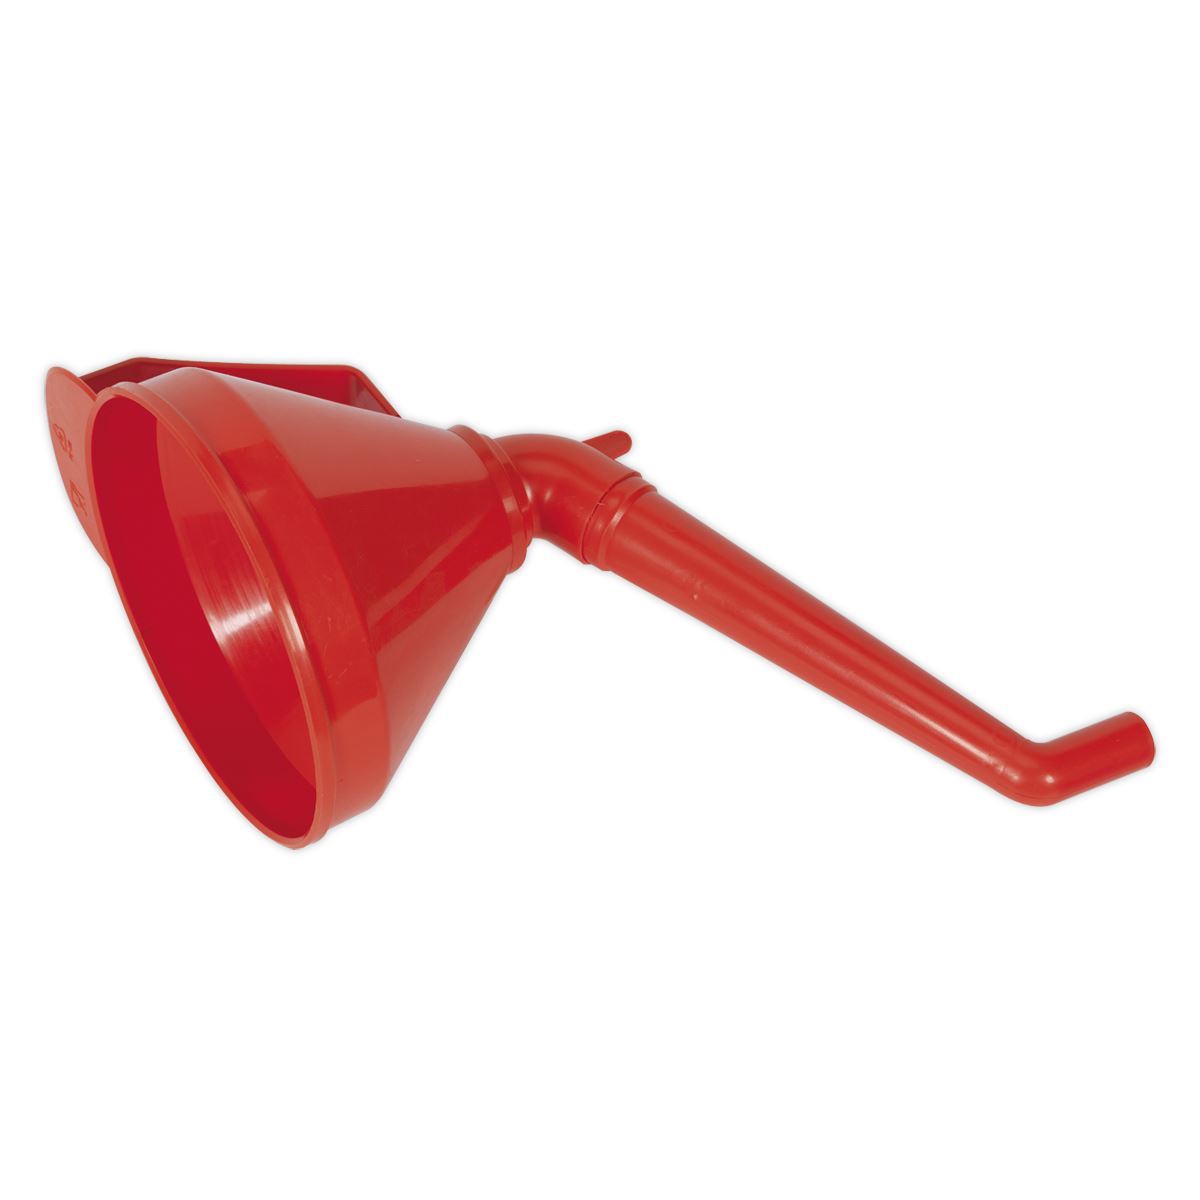 Sealey Funnel with Fixed Offset Spout & Filter Medium Ø160mm